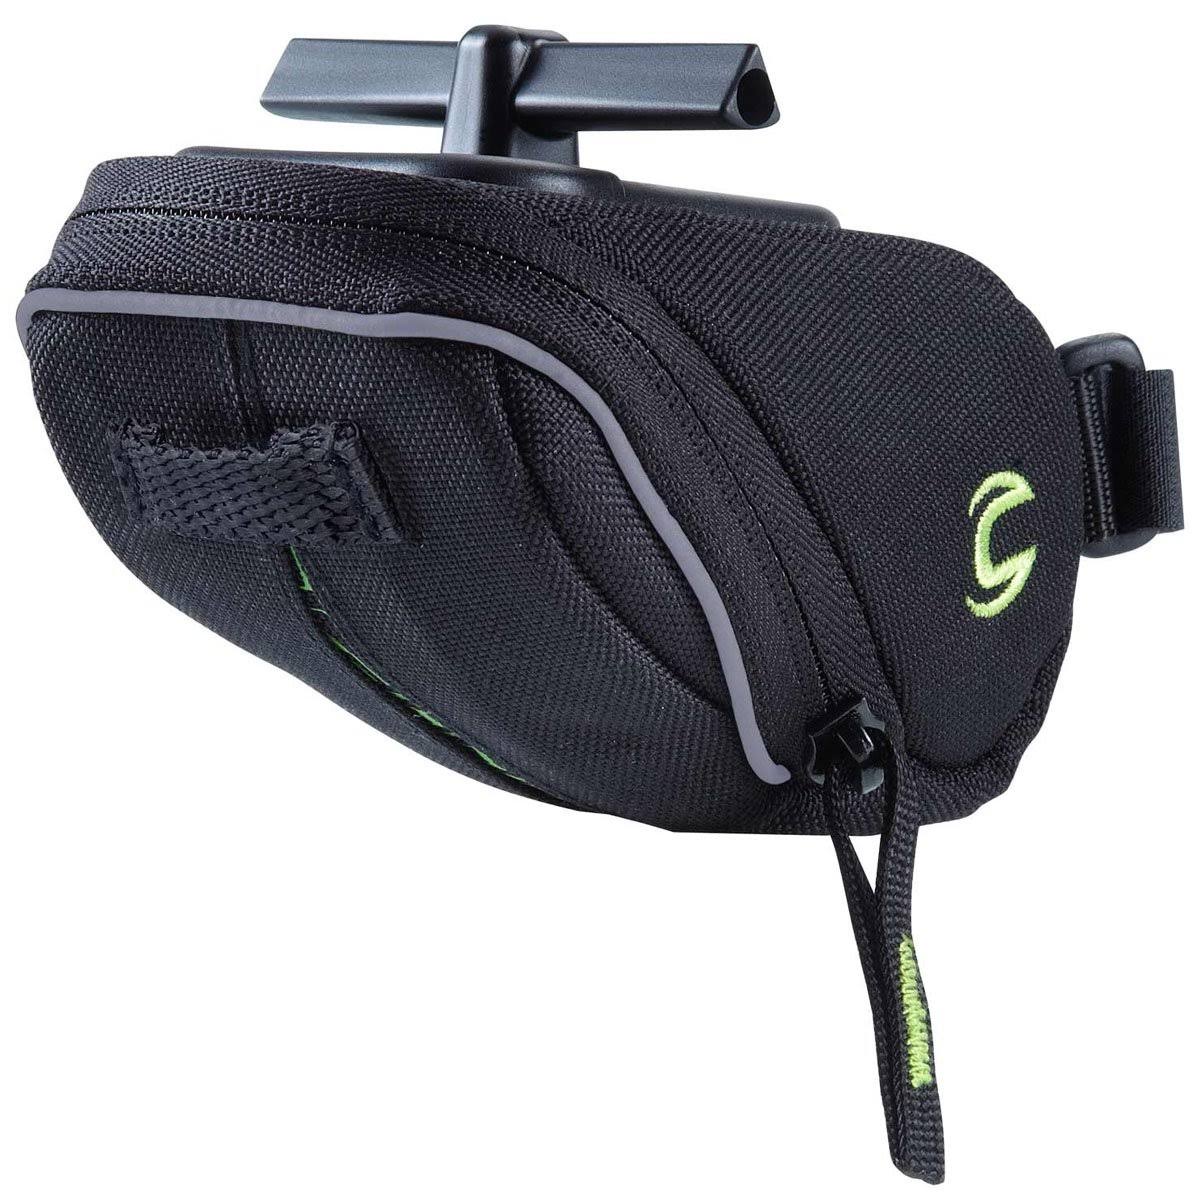 Cannondale Quick Release Bicycle Seat Bag - Small, Black